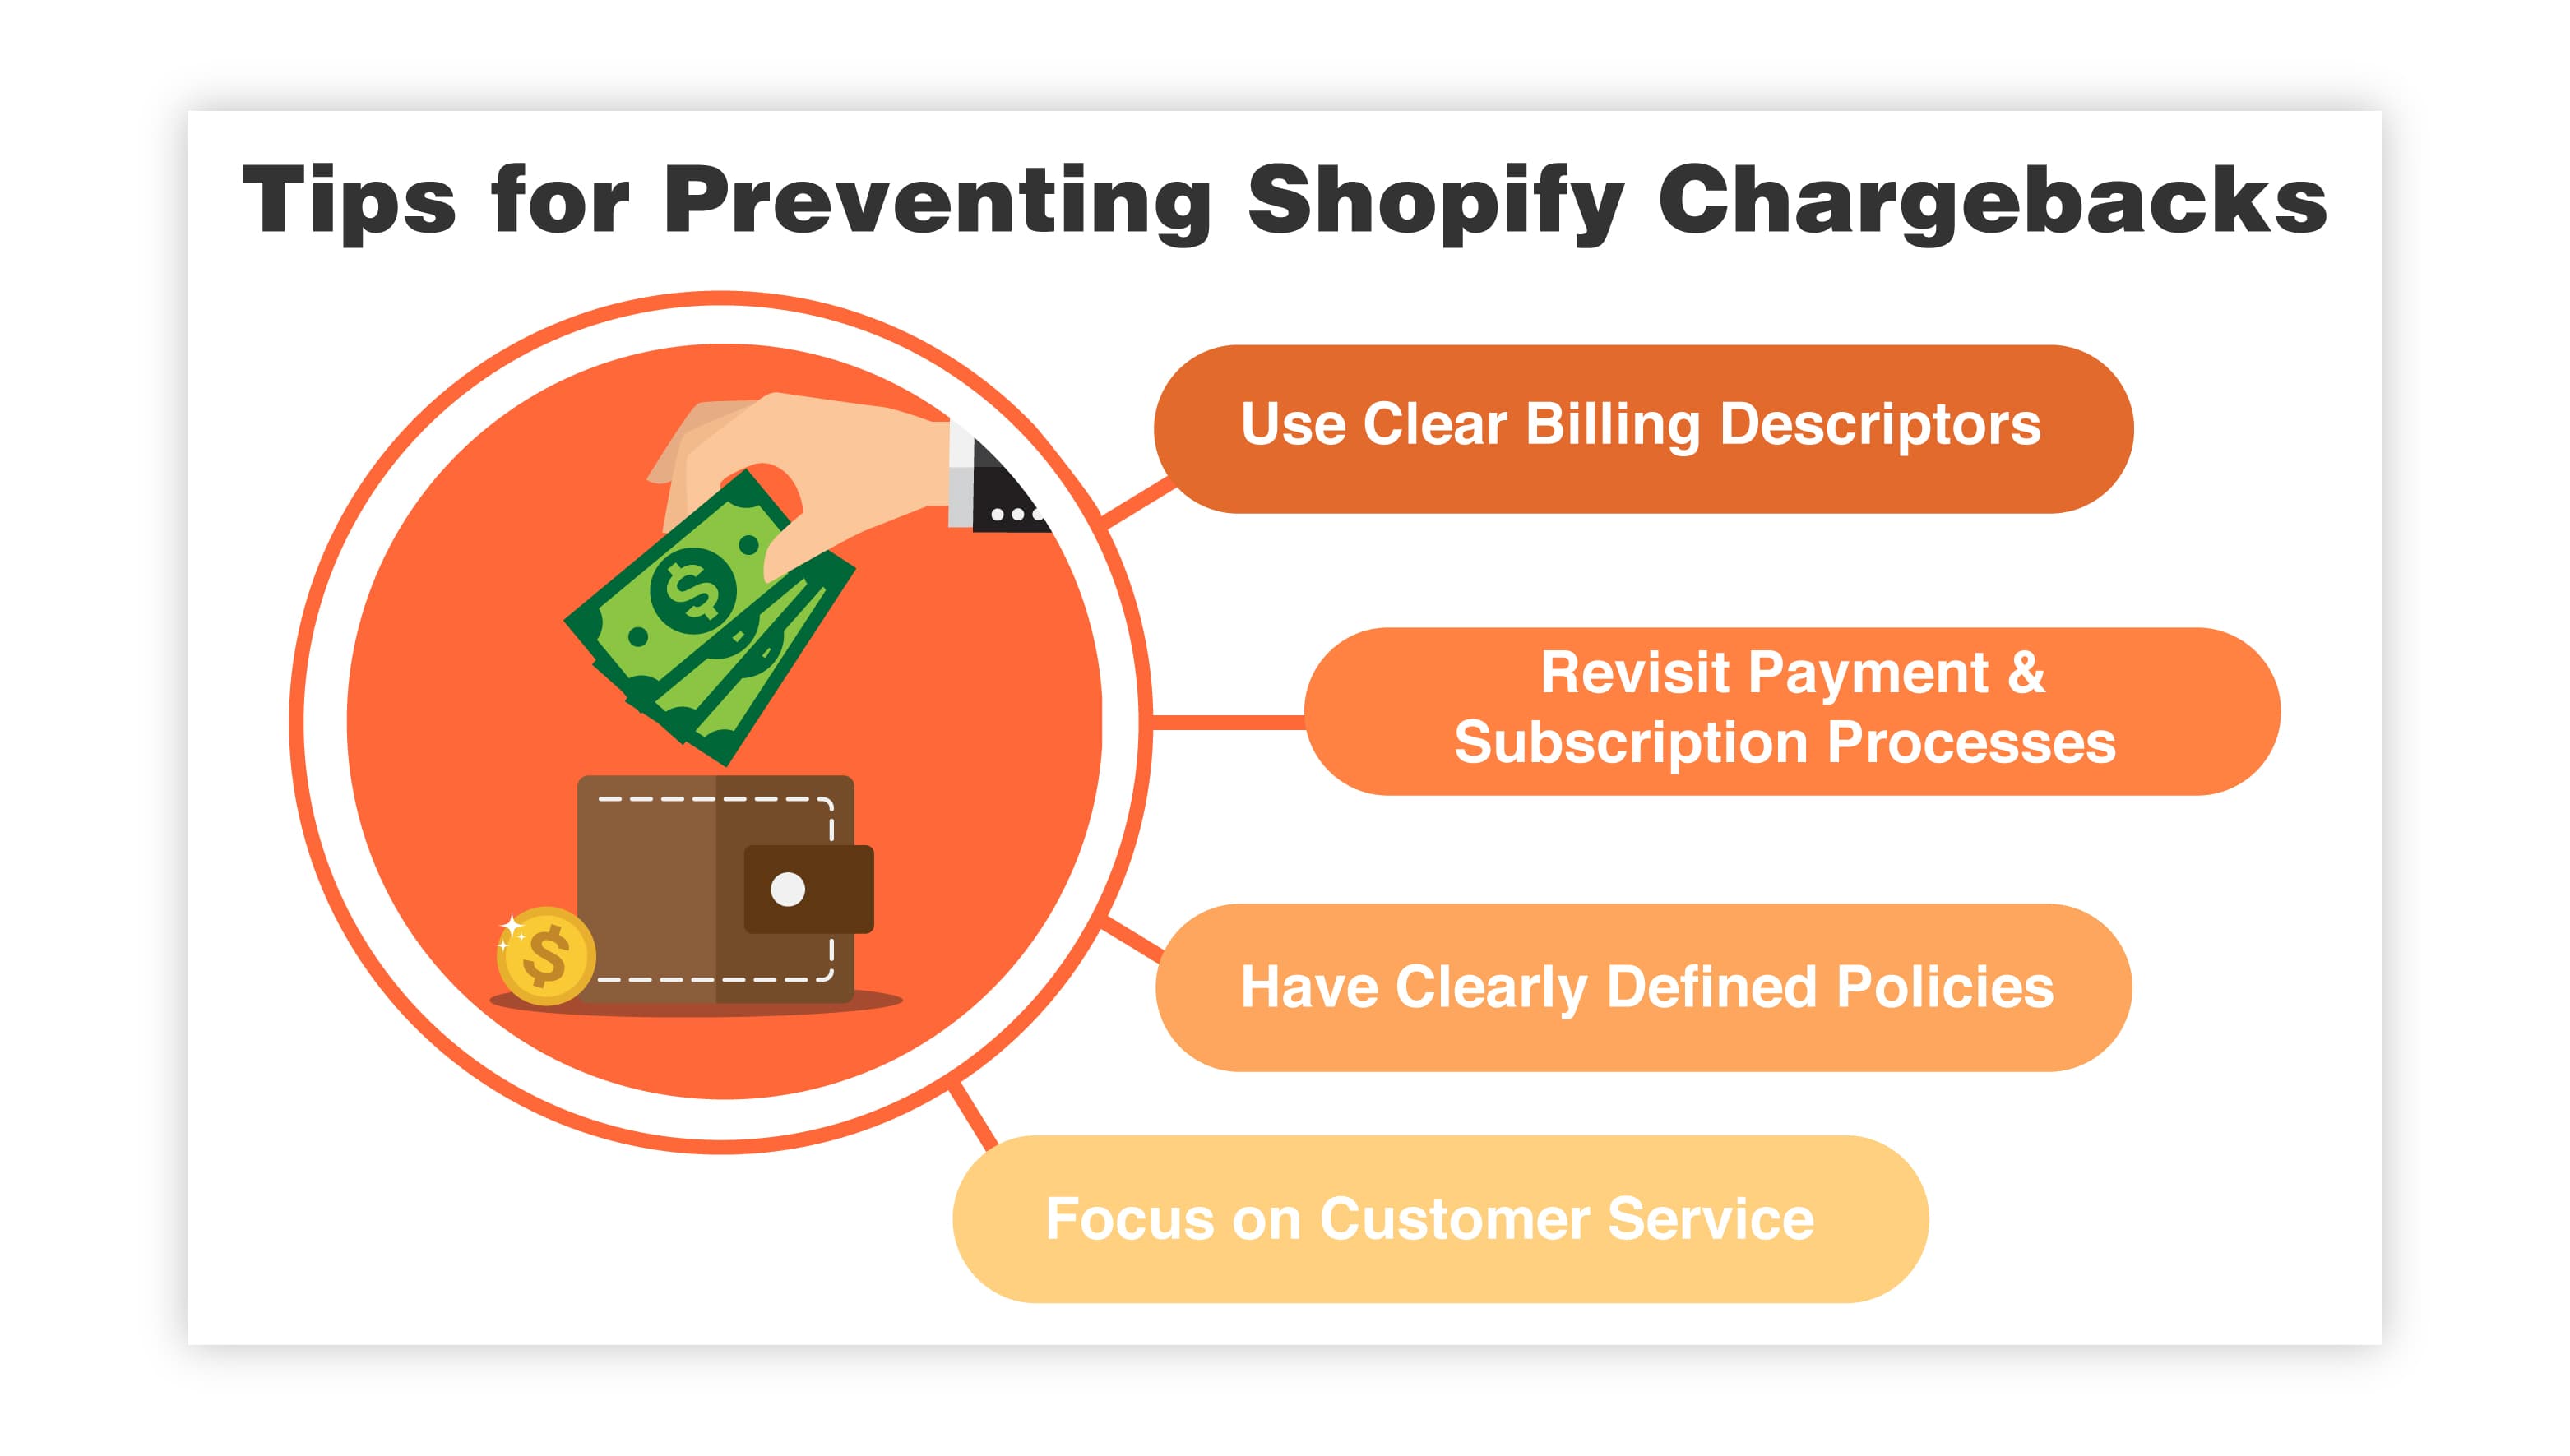 Tips for Preventing Shopify Chargebacks